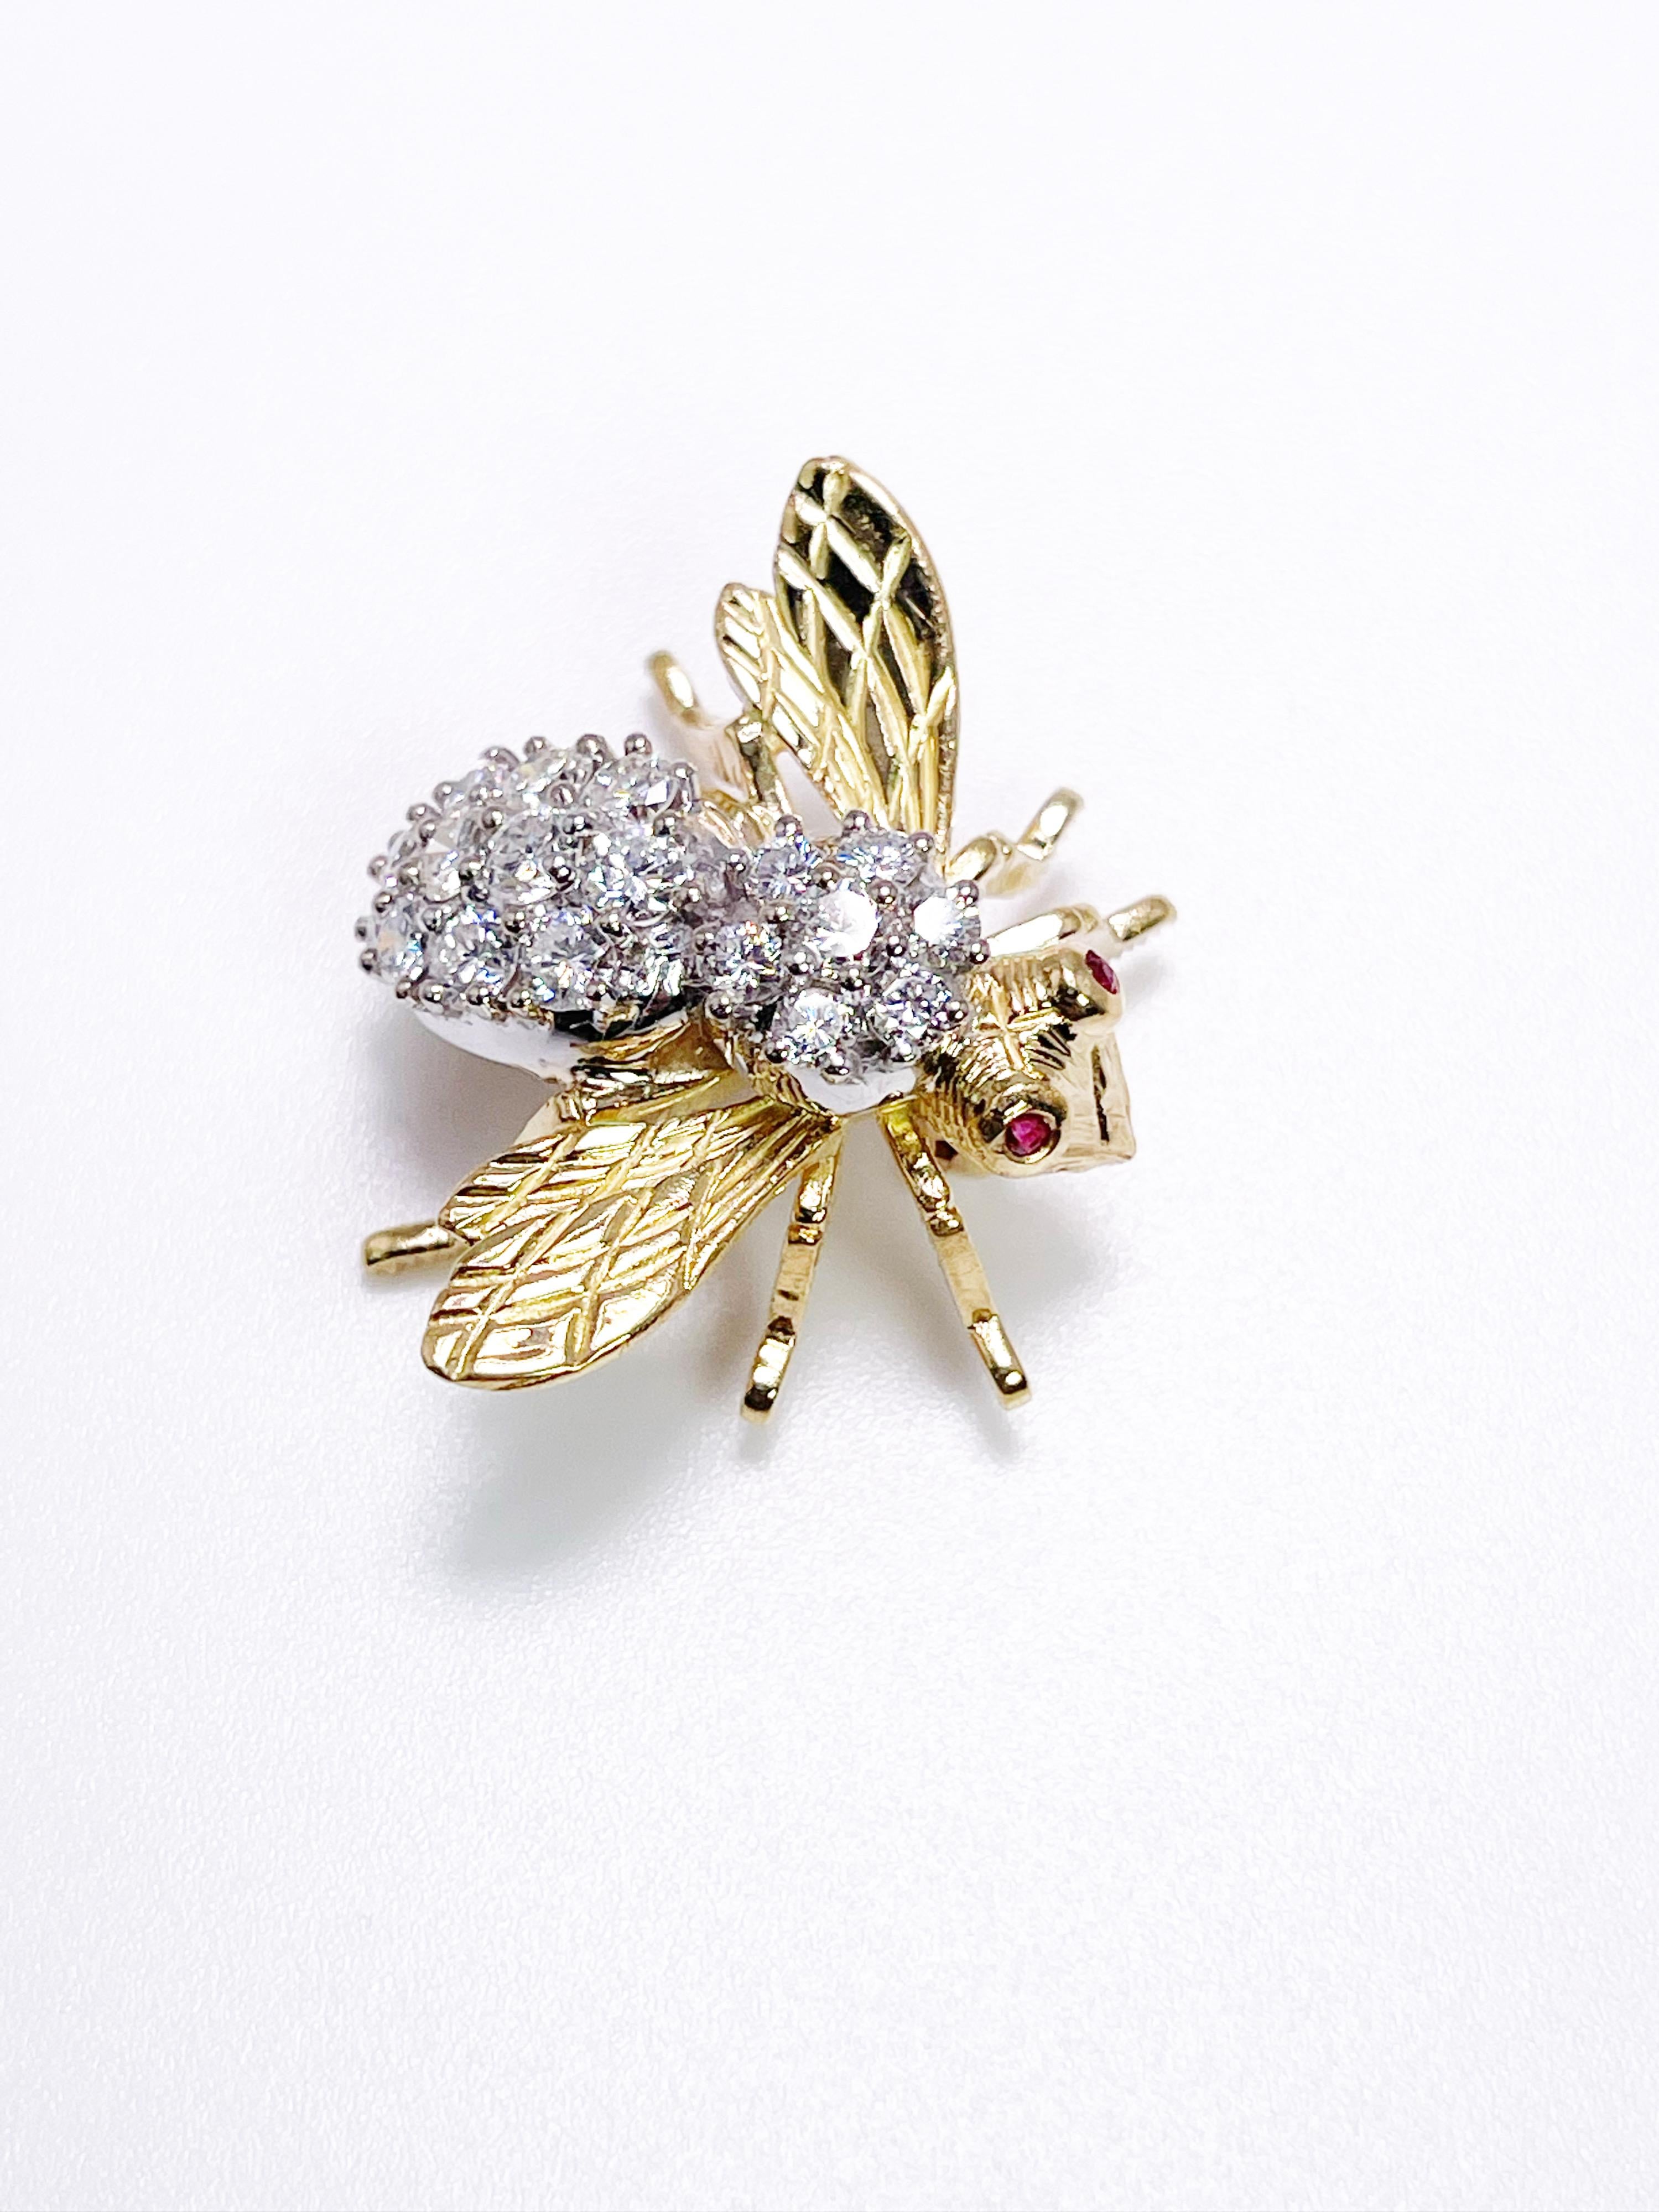 Contemporary Herbert Rosenthal Large Bee Diamond Pin Brooch Rare Find 1.55 Carats For Sale